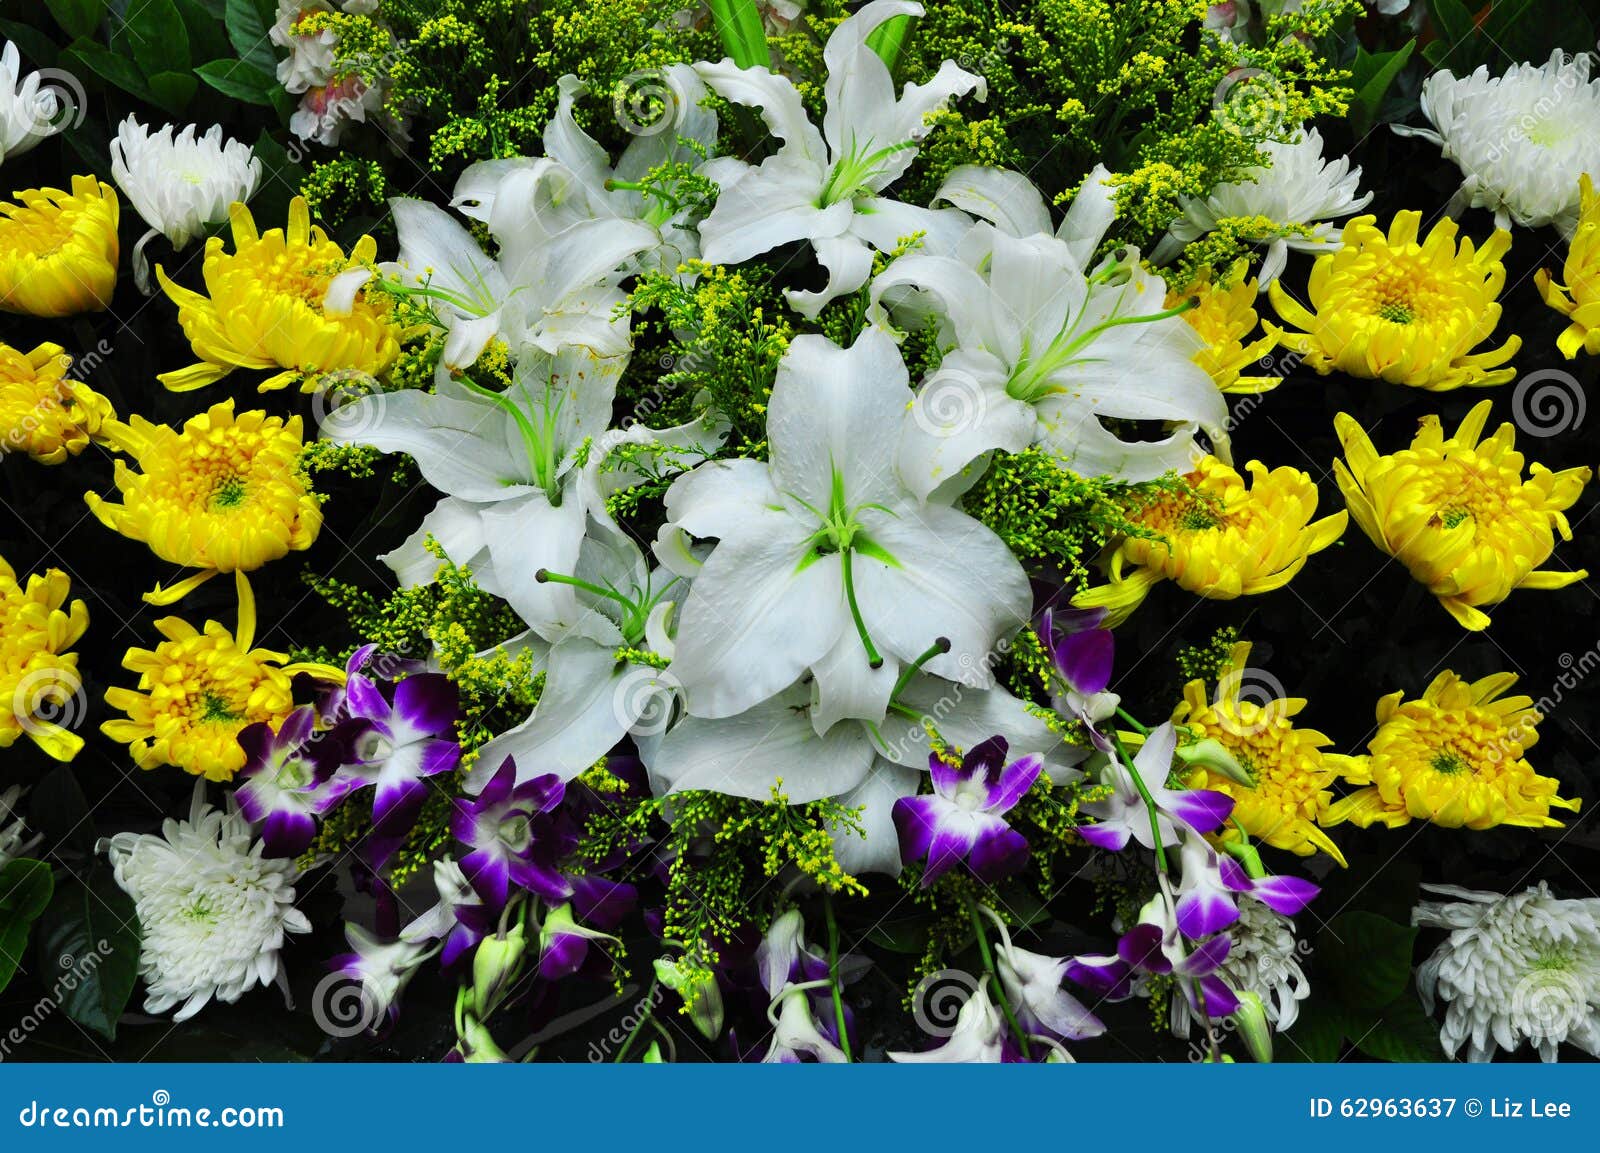 Funeral flowers for condolences，white and yellow chrysanthemum 